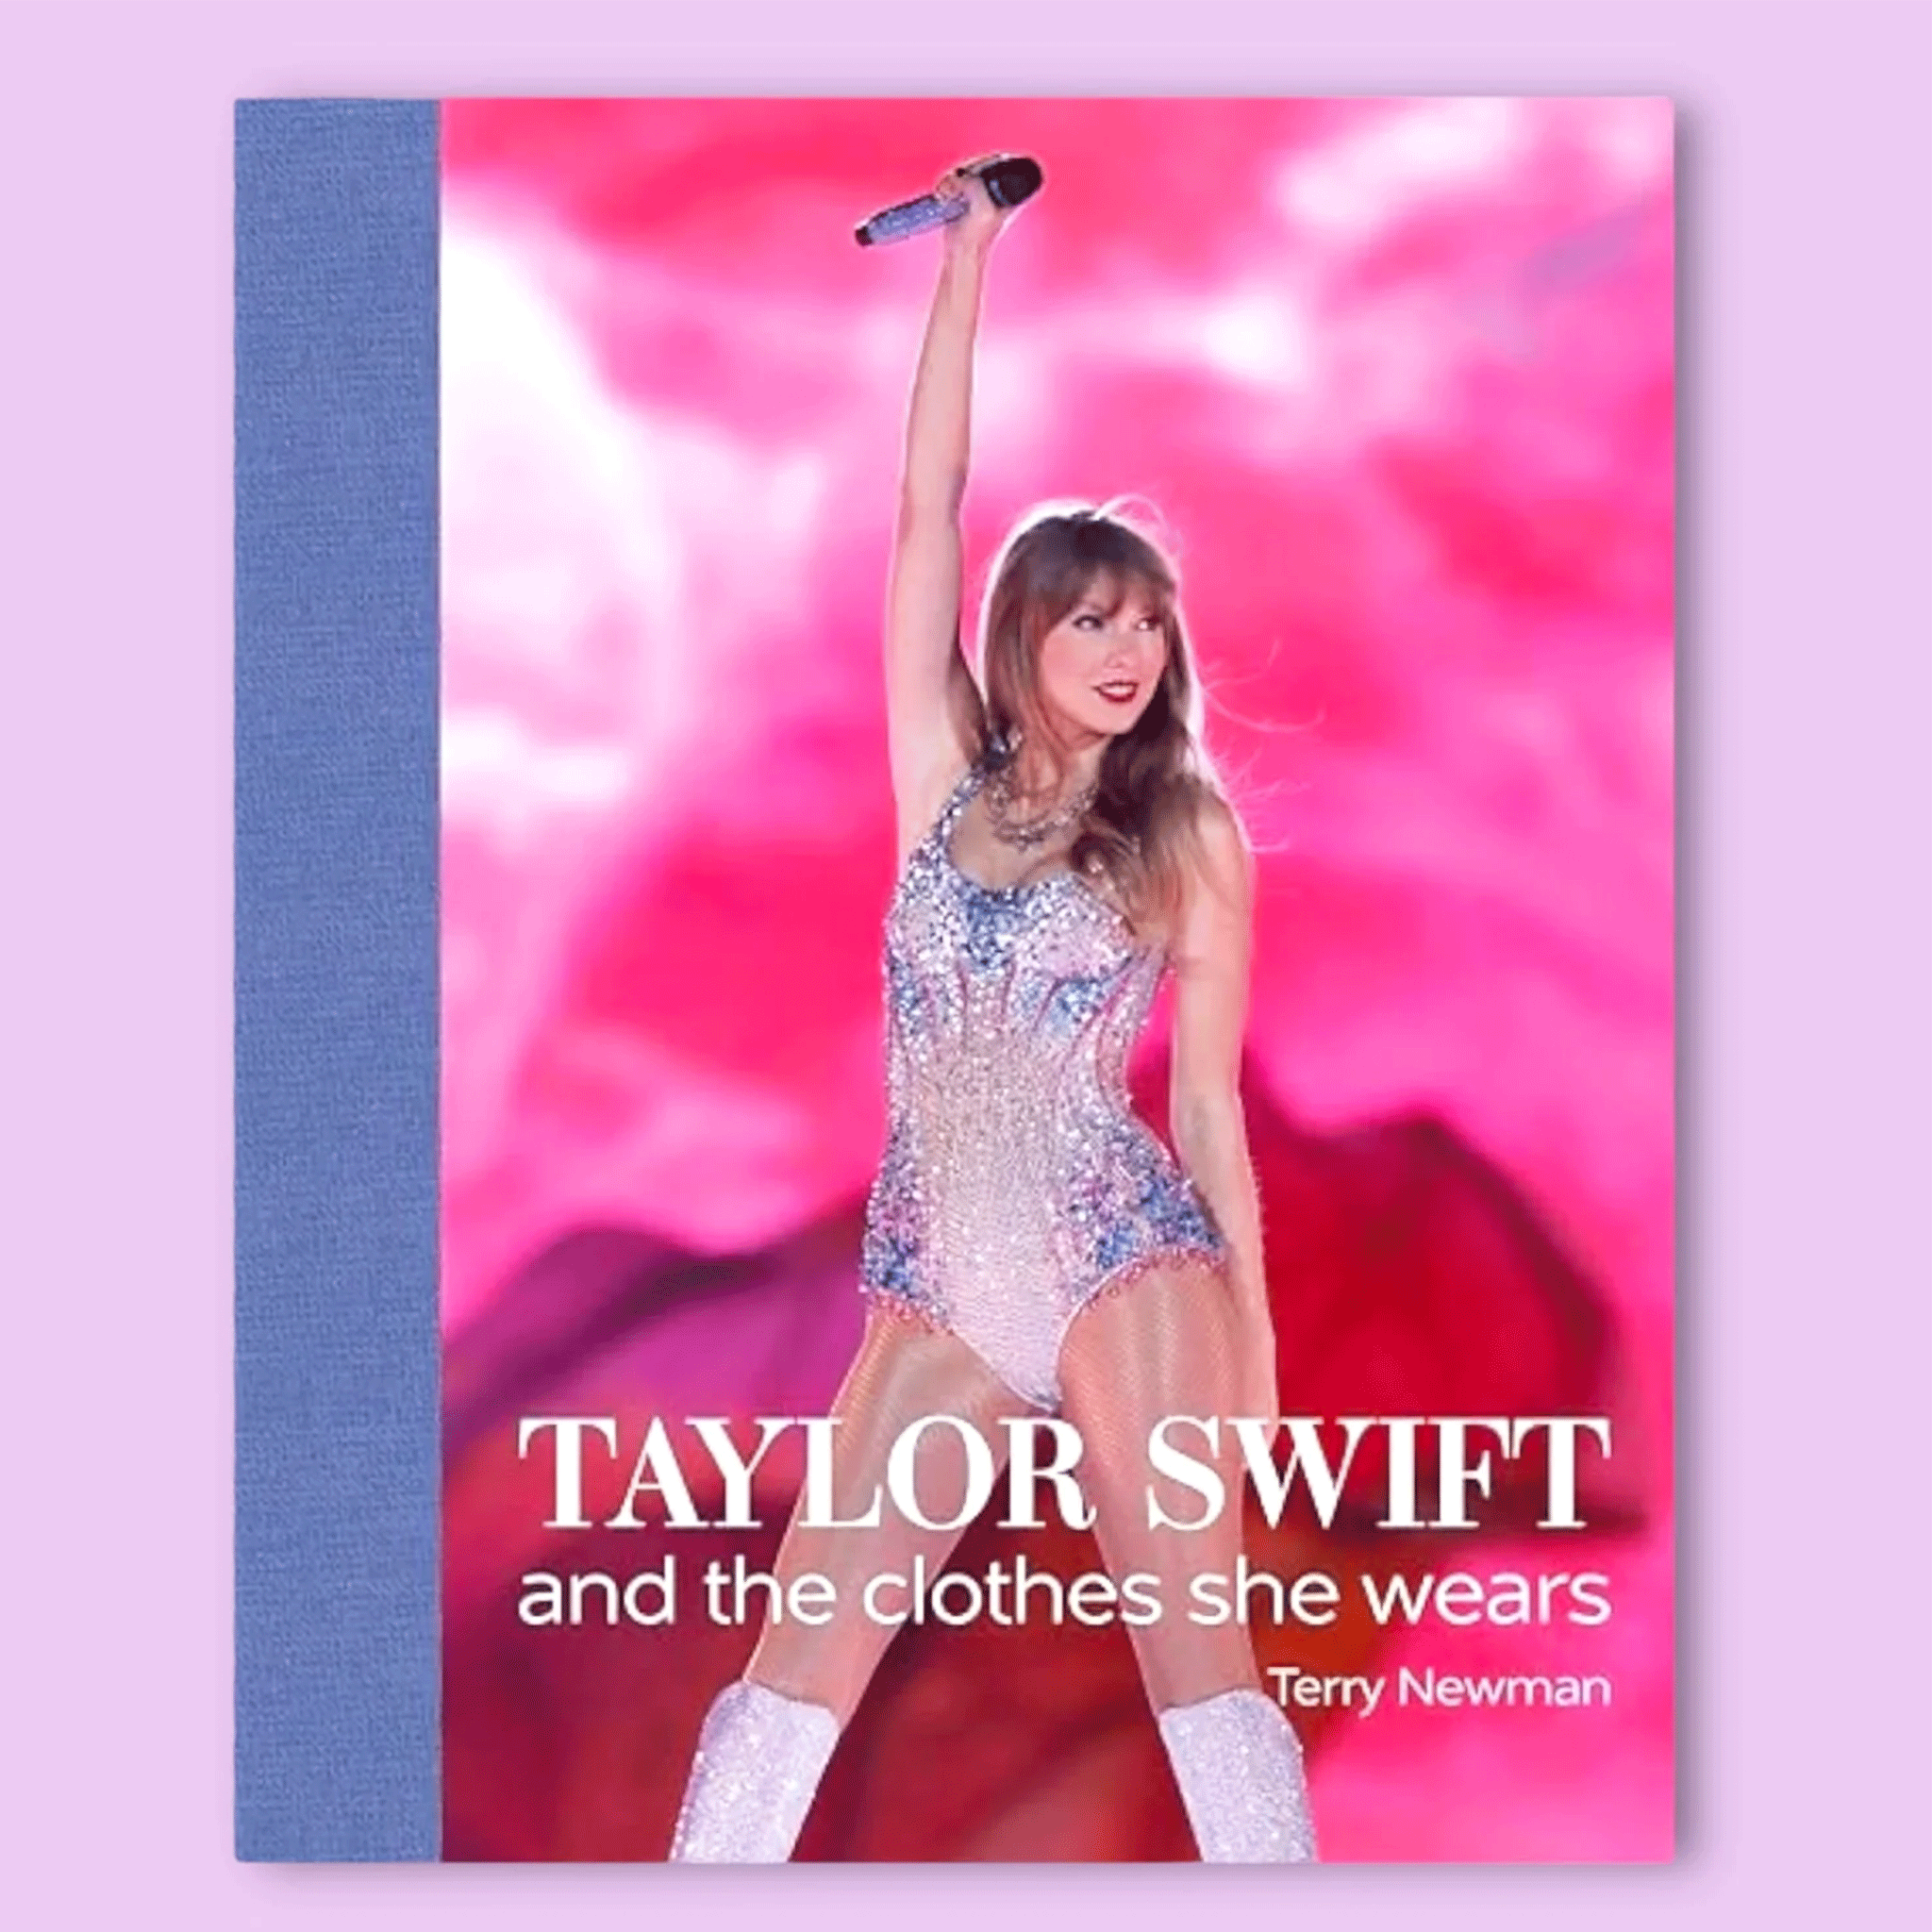 On a purple background is a hot pink book cover with a photo of Taylor Swift in her sparkle stage outfit along with text along the bottom half that reads, &quot;Taylor Swift and the clothes she wears&quot;.  